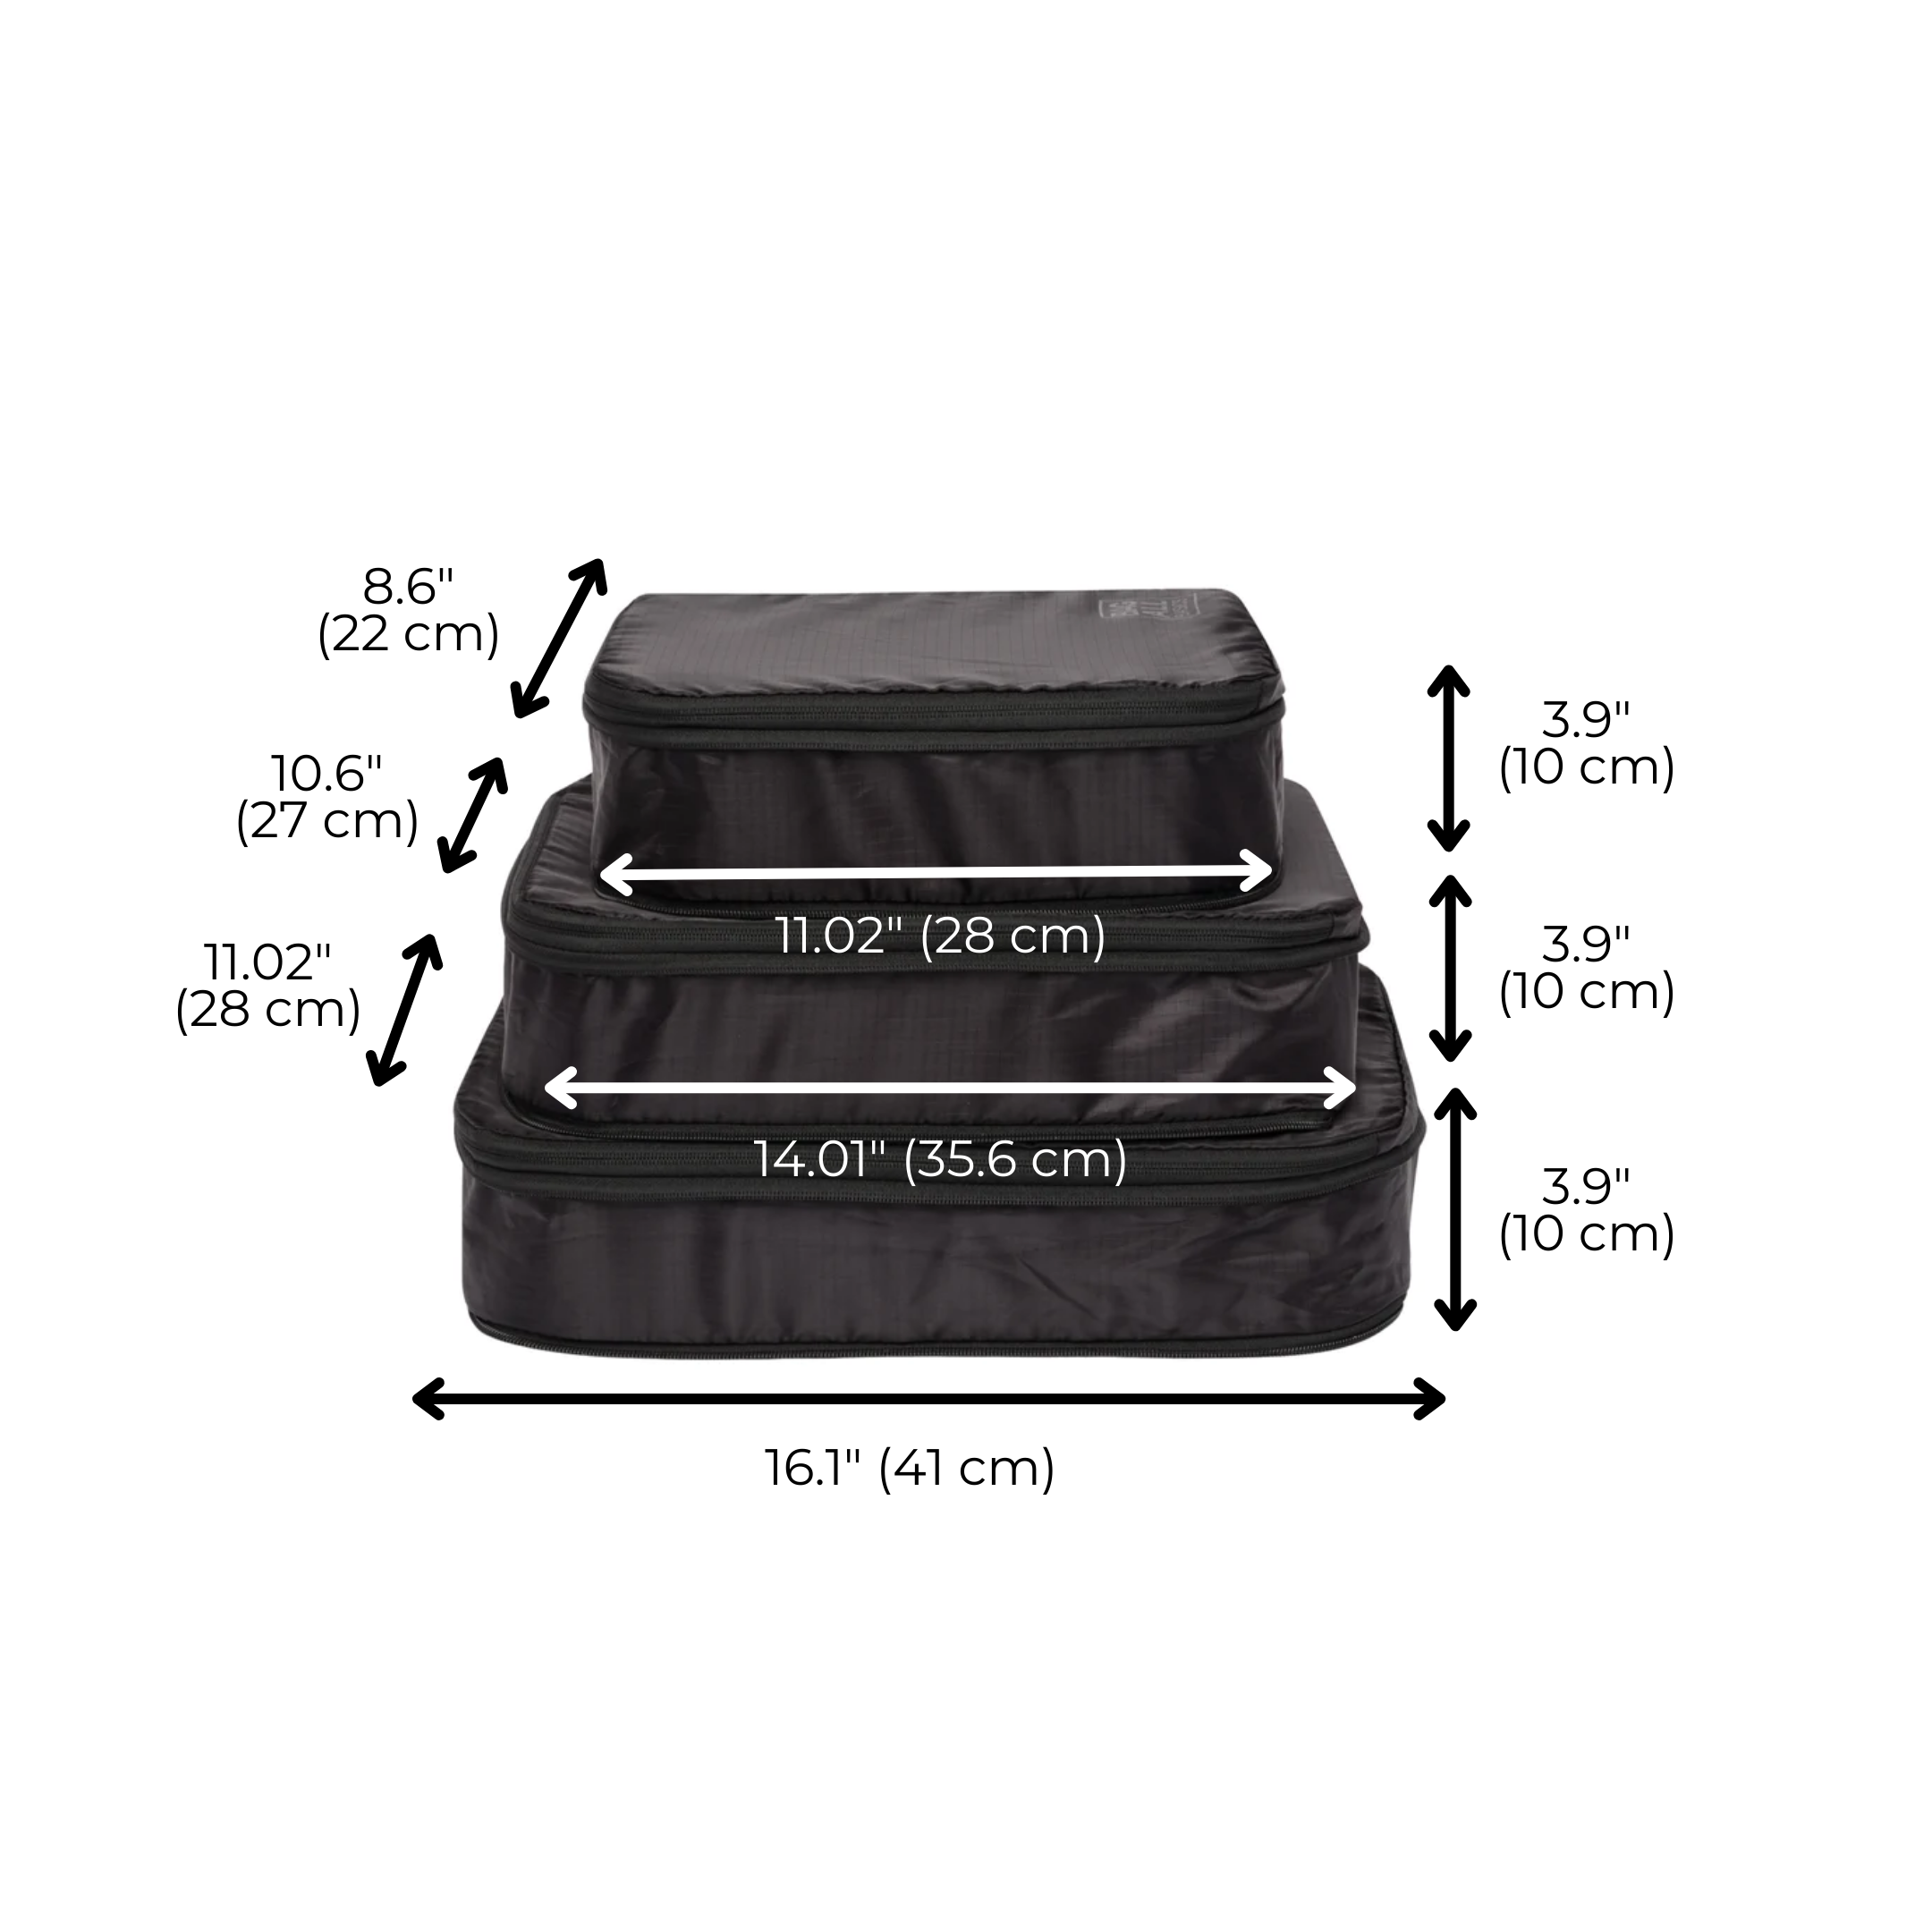 Re-cycled and Reinforced Nylon Compression Packing Cubes, 3-pack Black | Bag-all